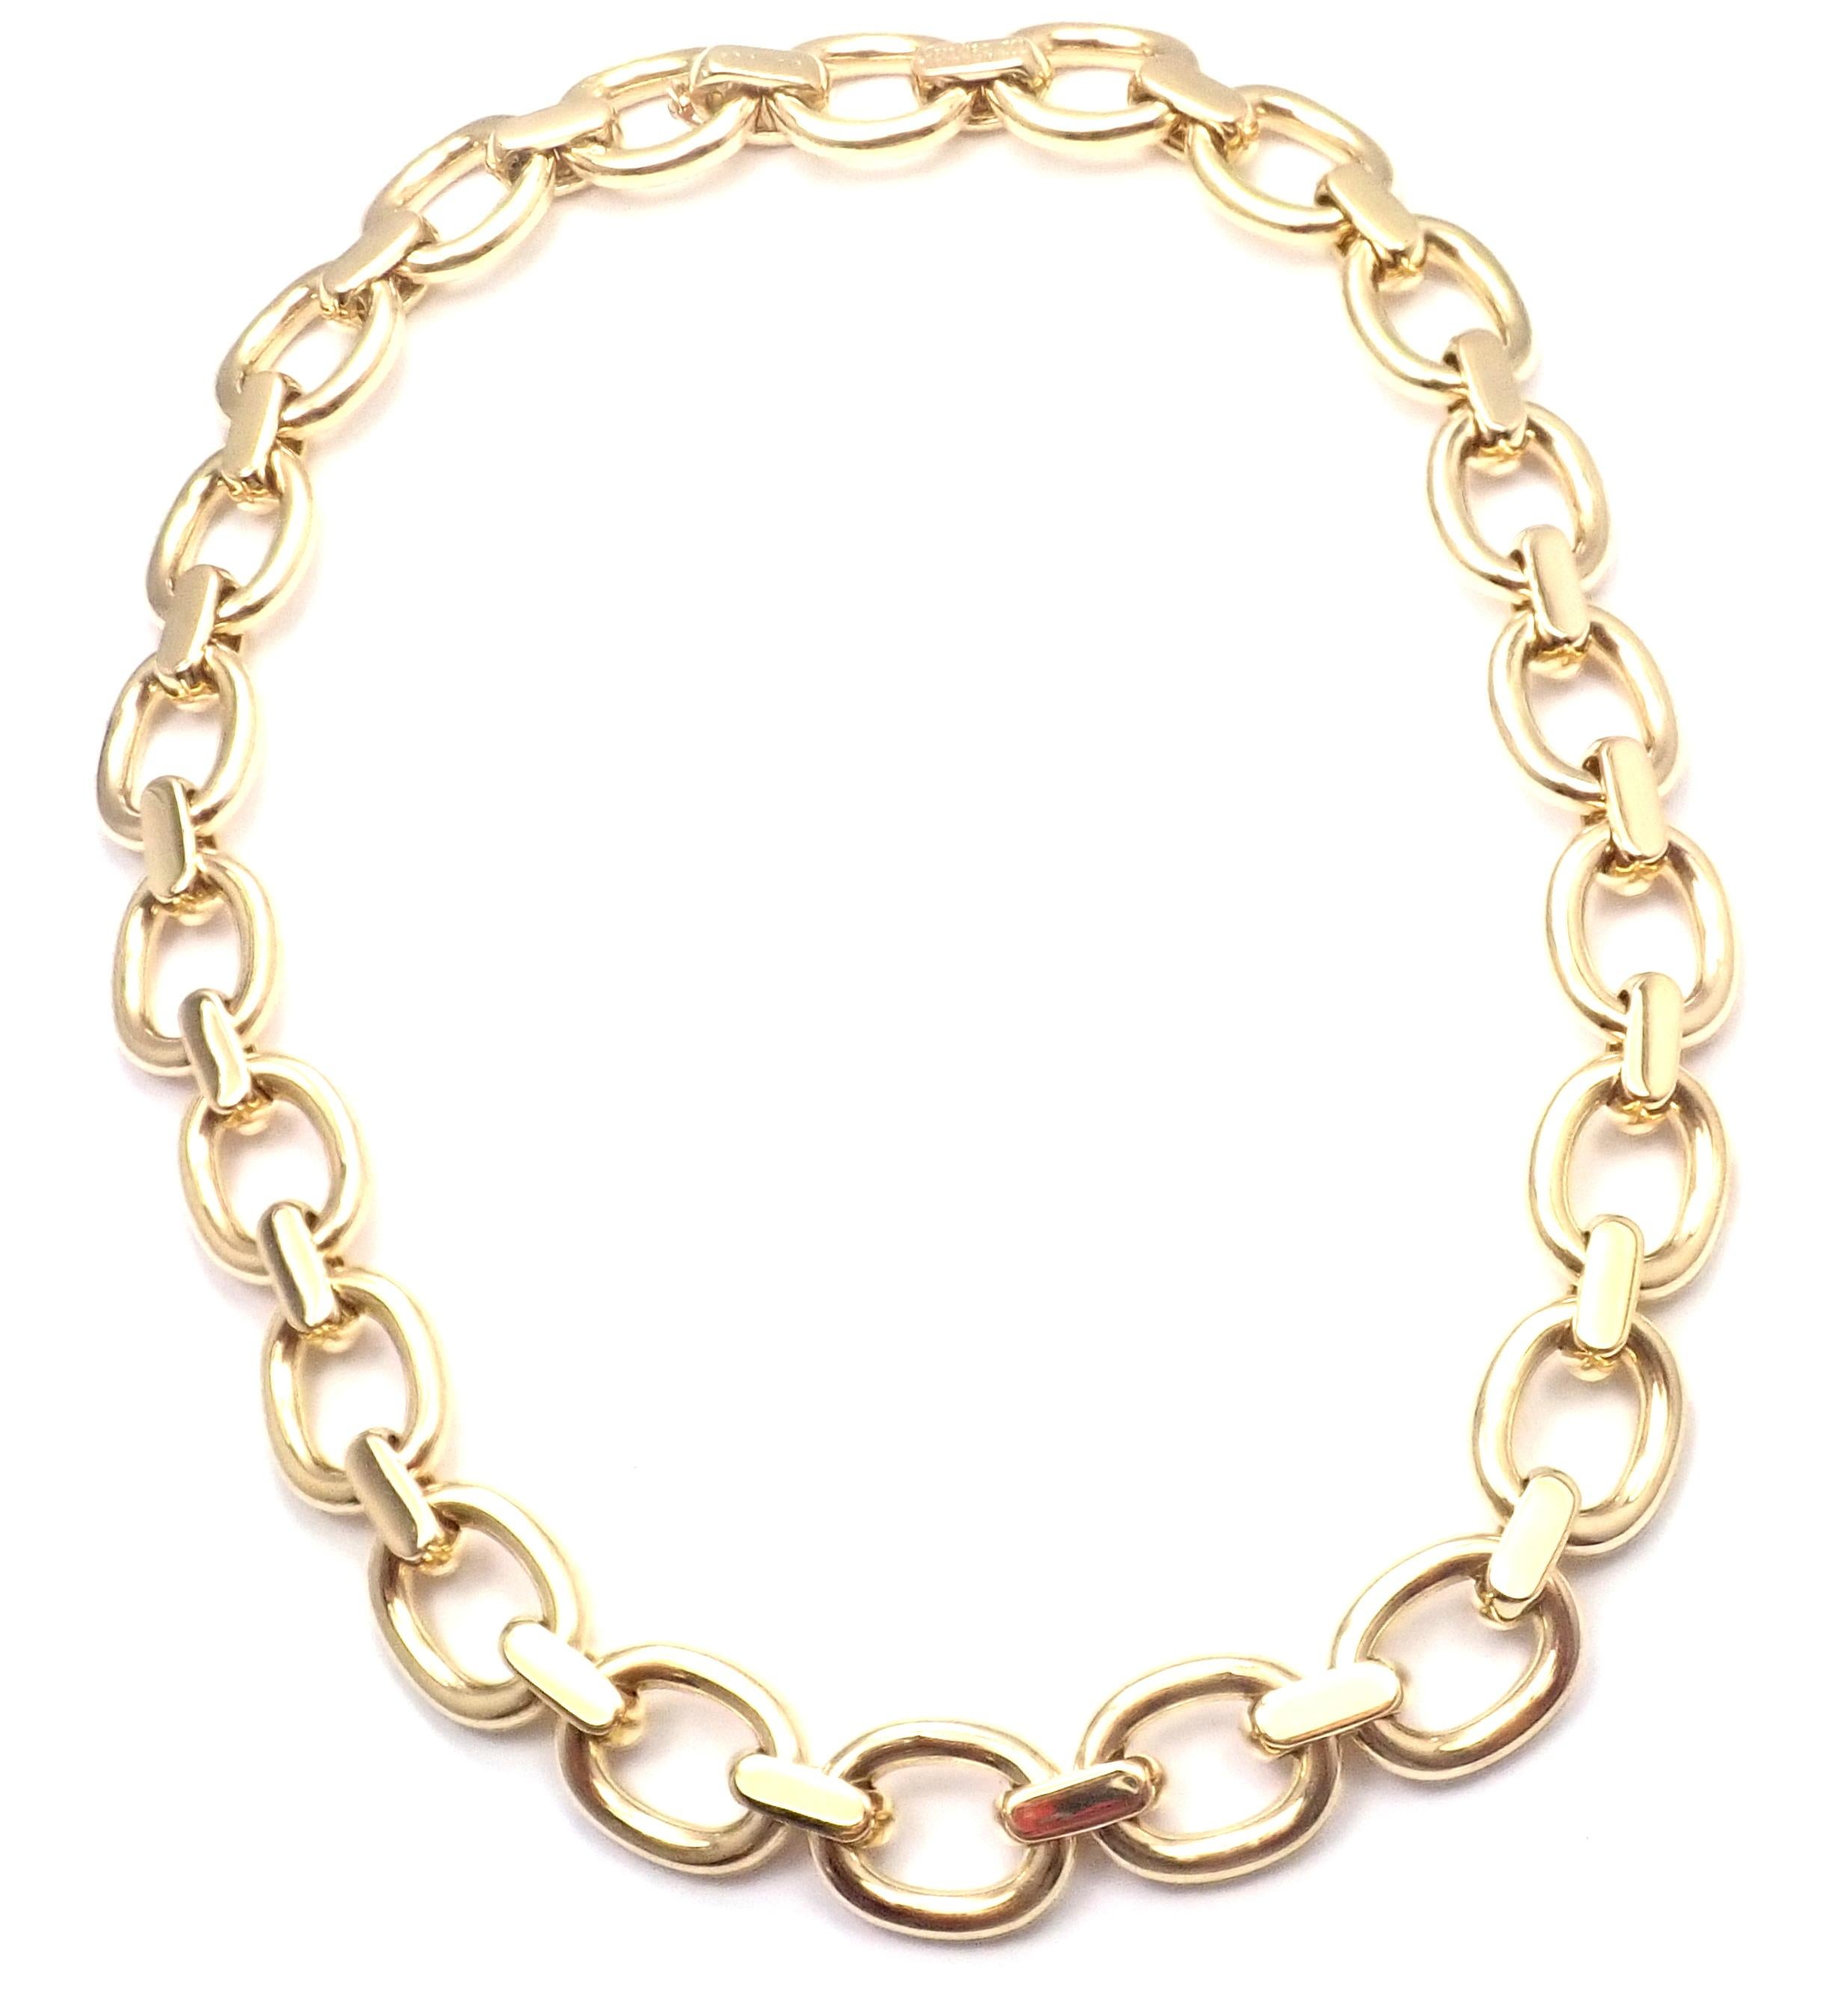 18k Yellow Gold Large Oval Link Necklace by Cartier. 
Details: 
Length: 17.5